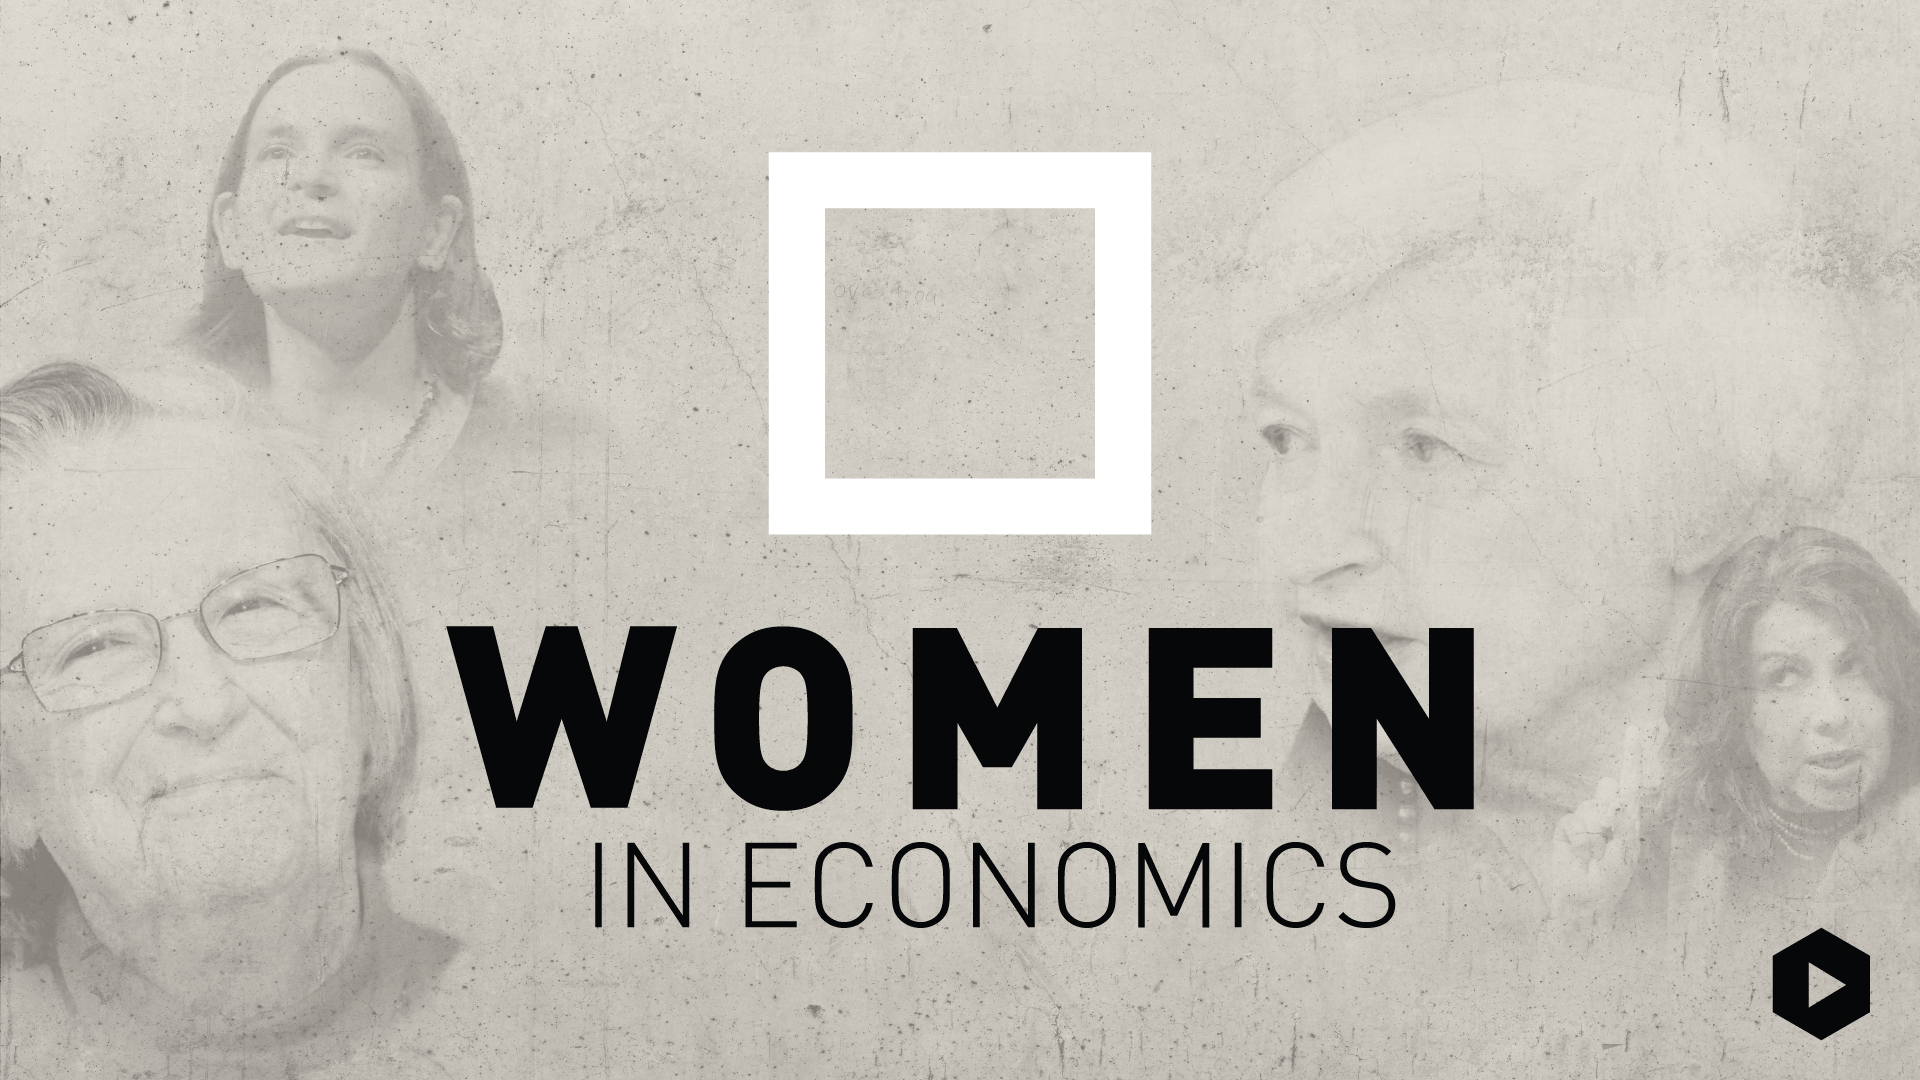 Influential Indian Young Women Economists across the Globe